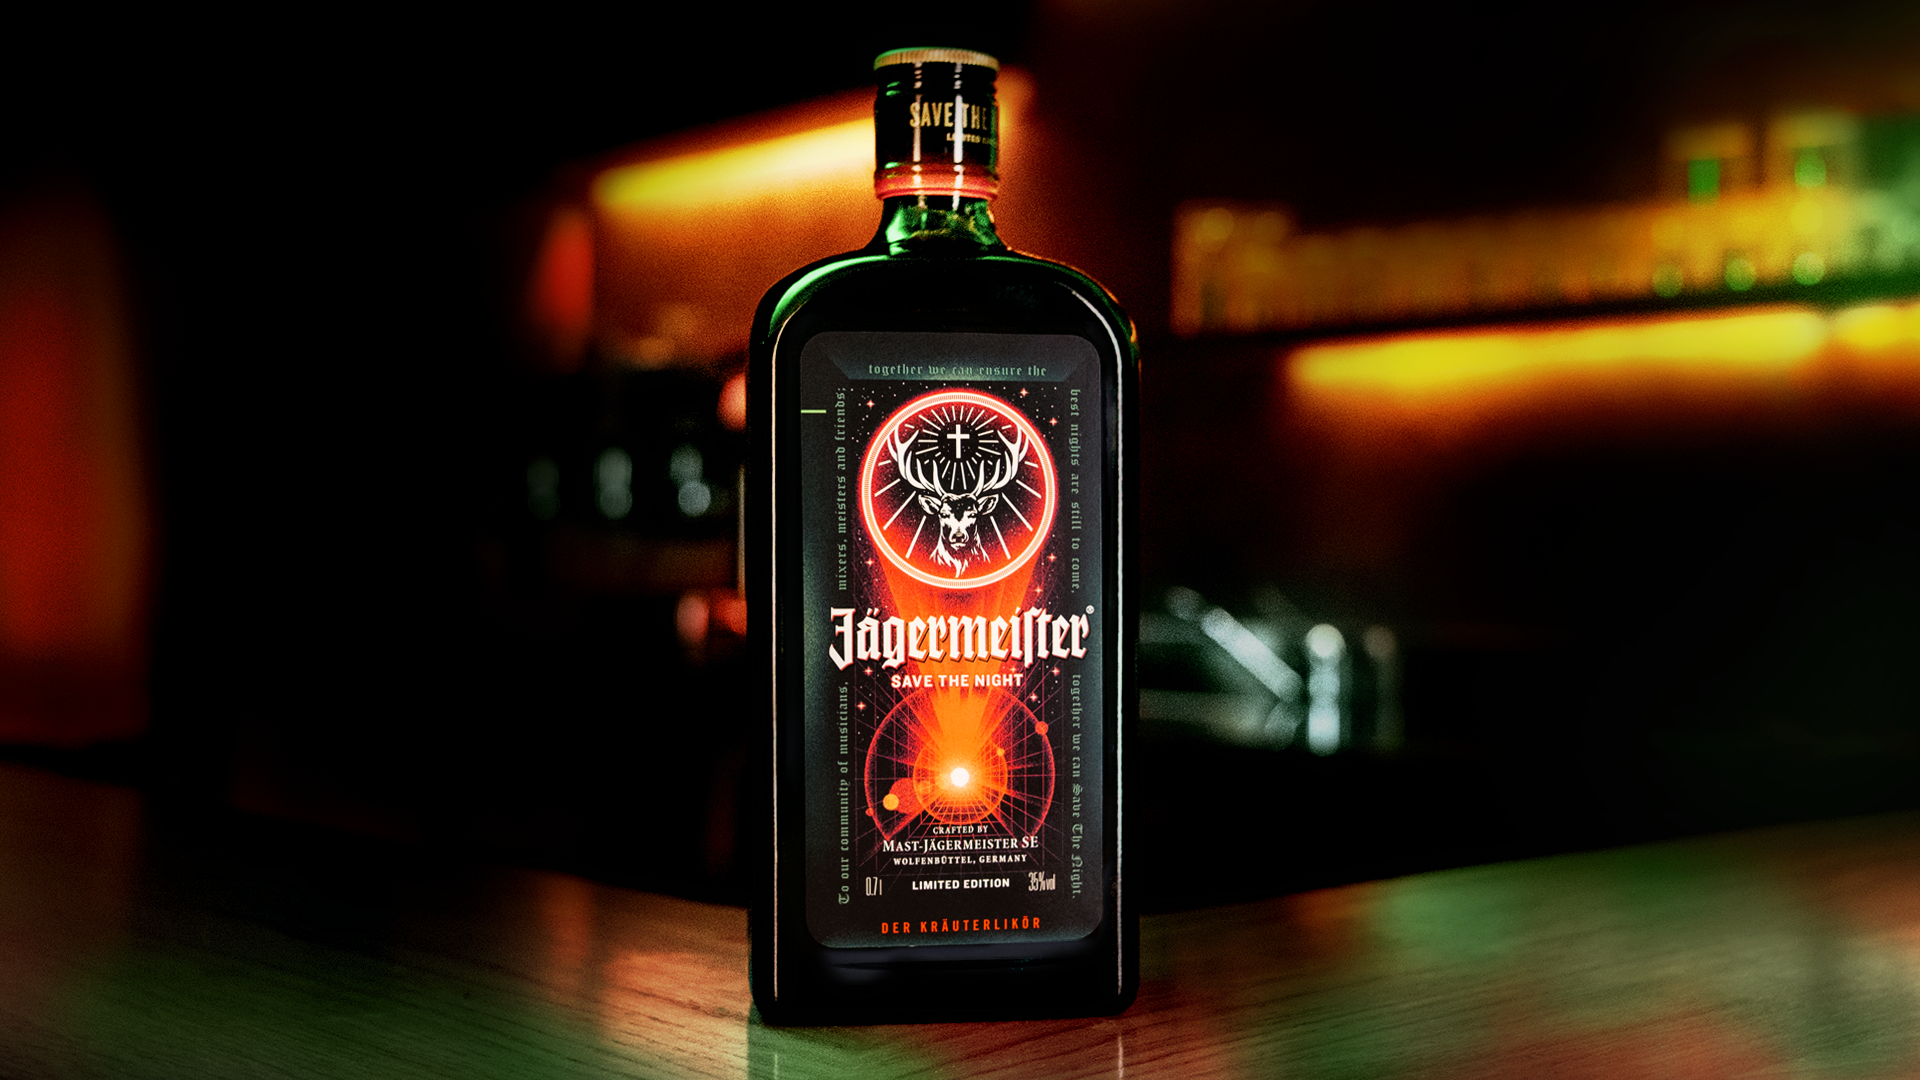 where is jagermeister from